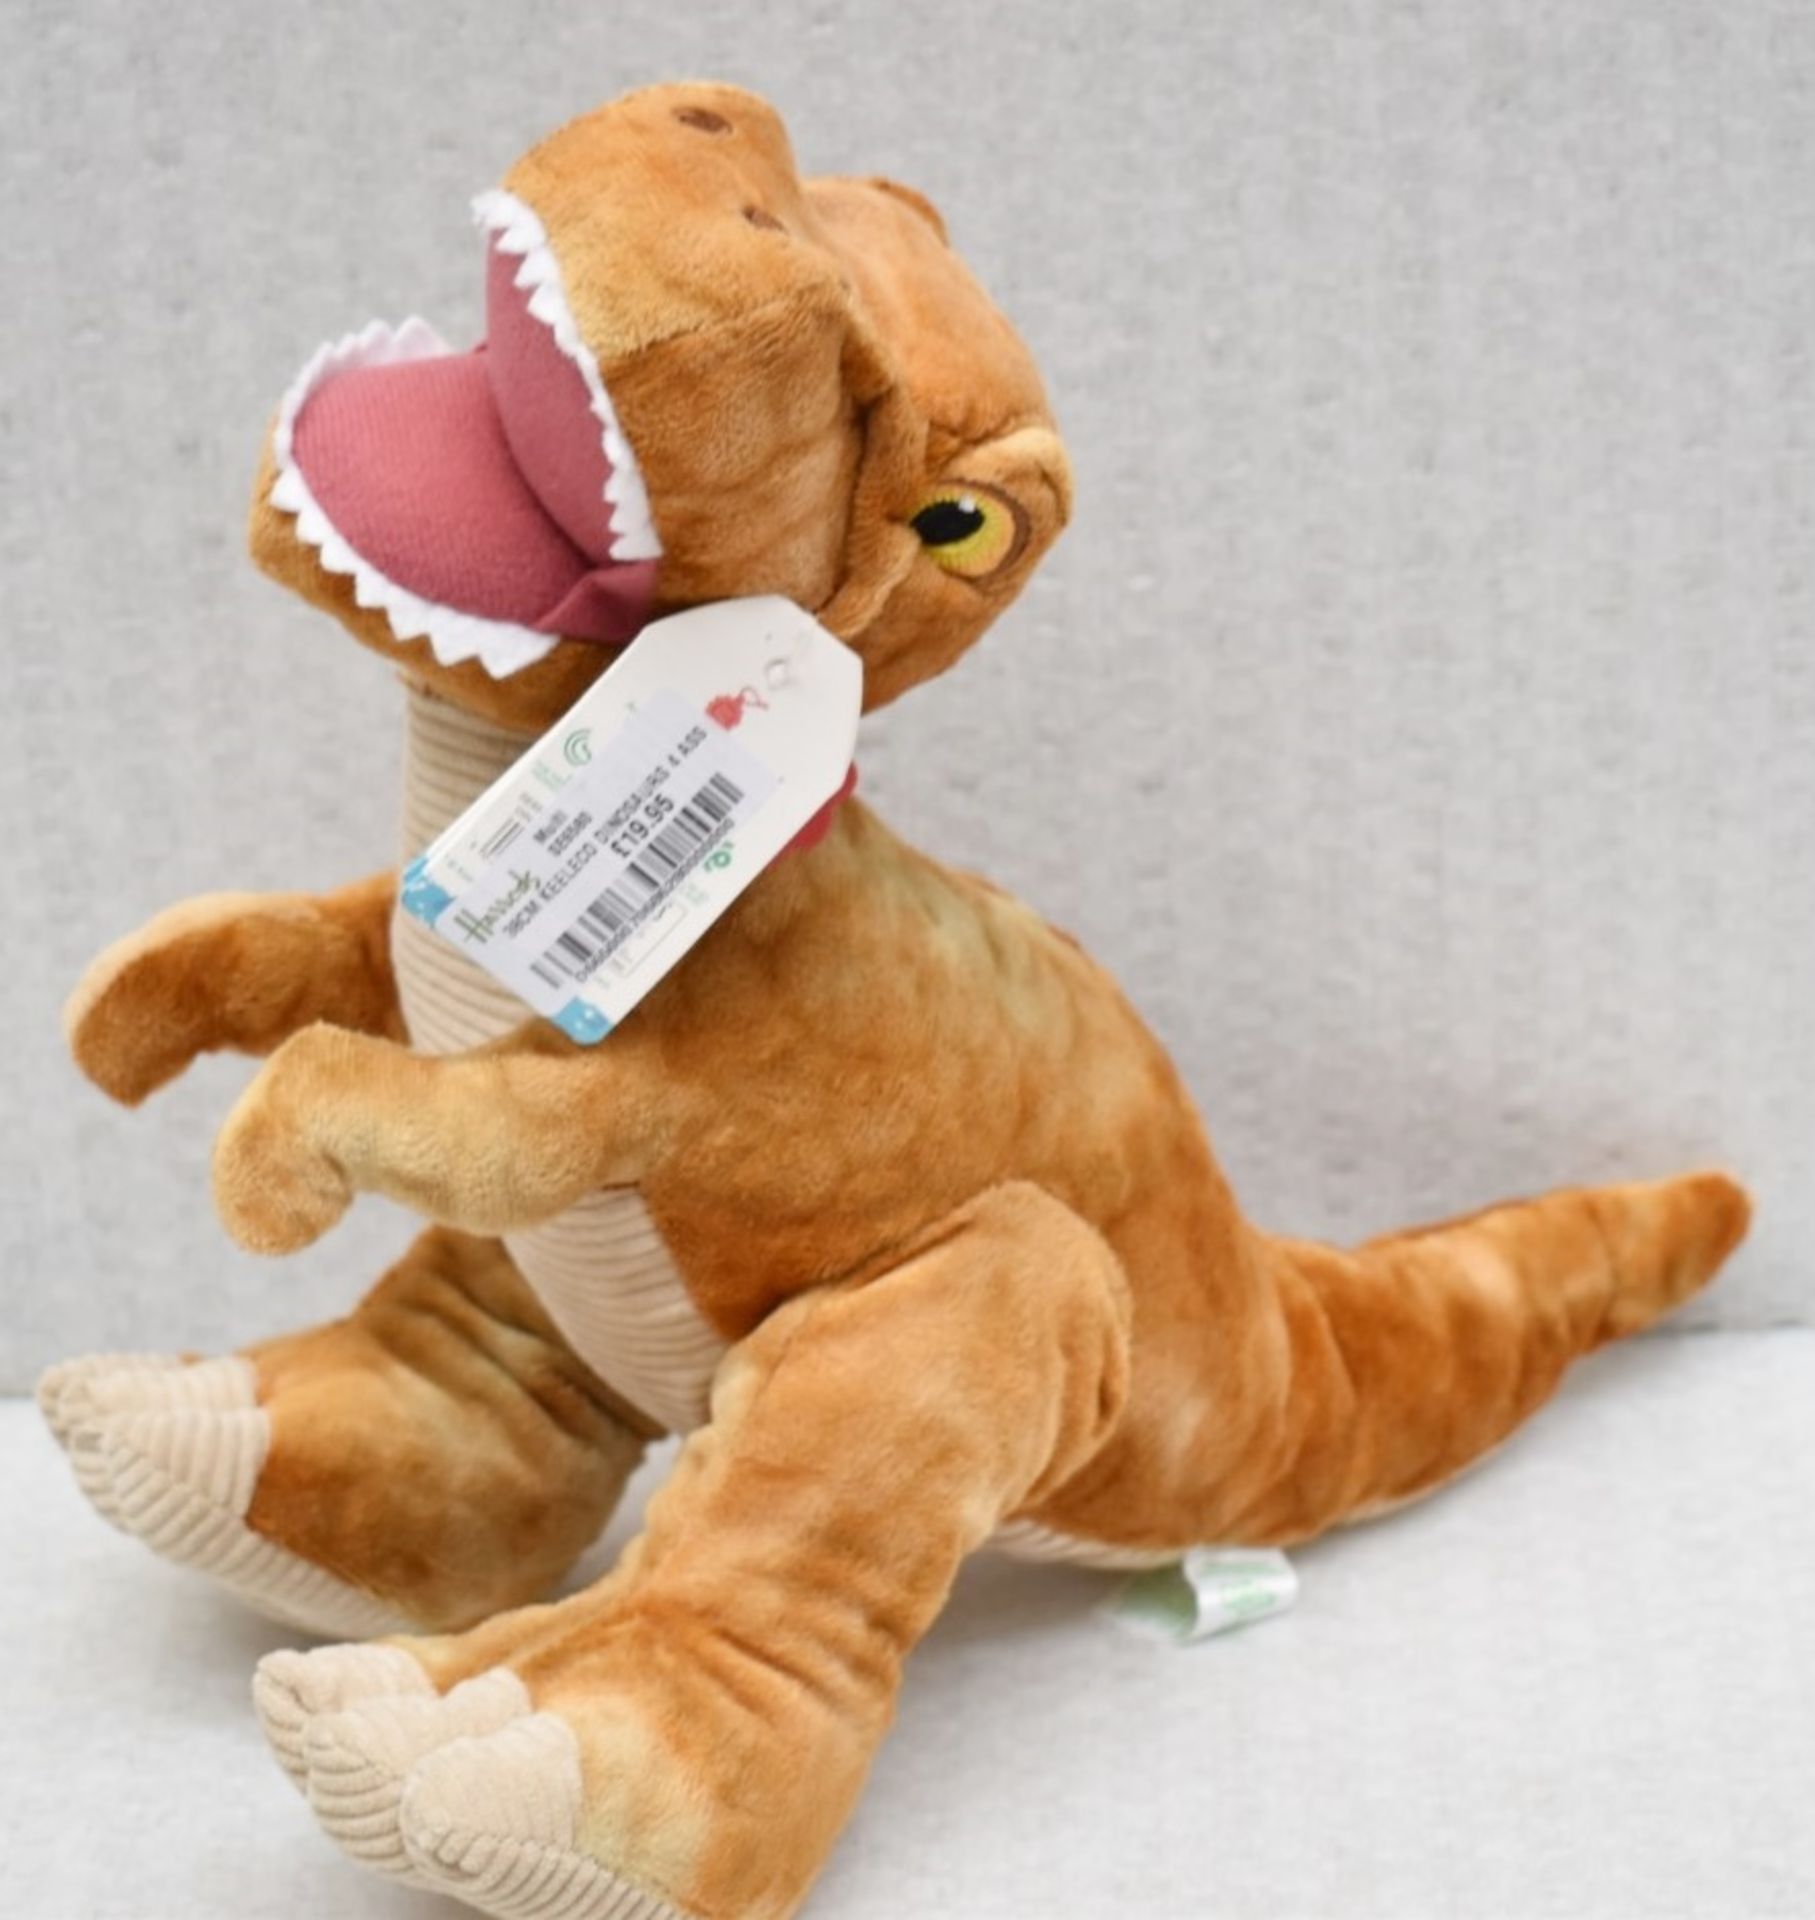 2 x KEEL Branded Plush Toys, Dinosaur and Giraffe - RRP £46.90 - See Condition - Ref: HAS2318+2329/ - Image 2 of 5